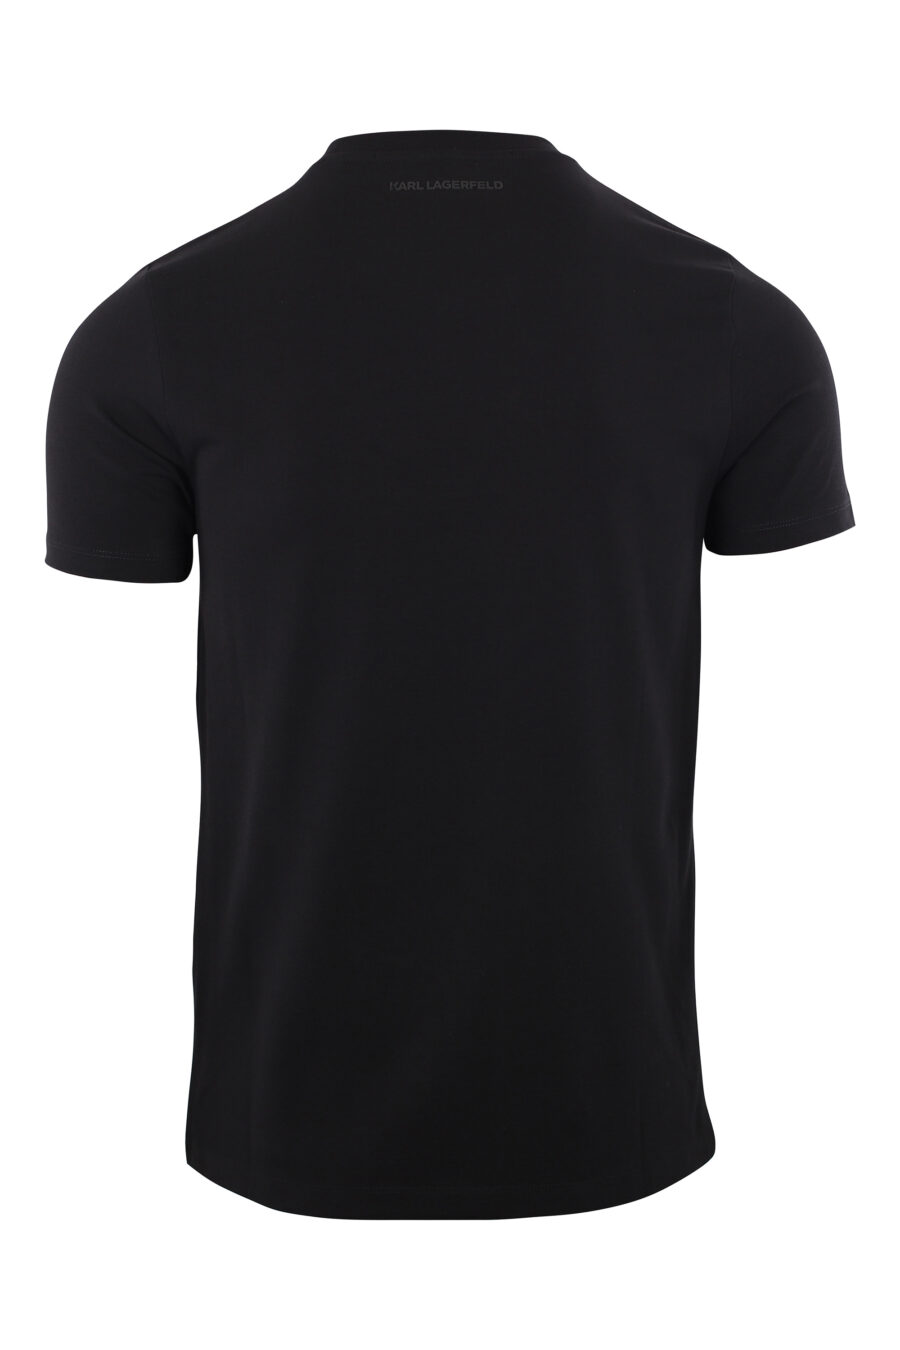 Black T-shirt with logo in mint green silhouette - IMG 1995